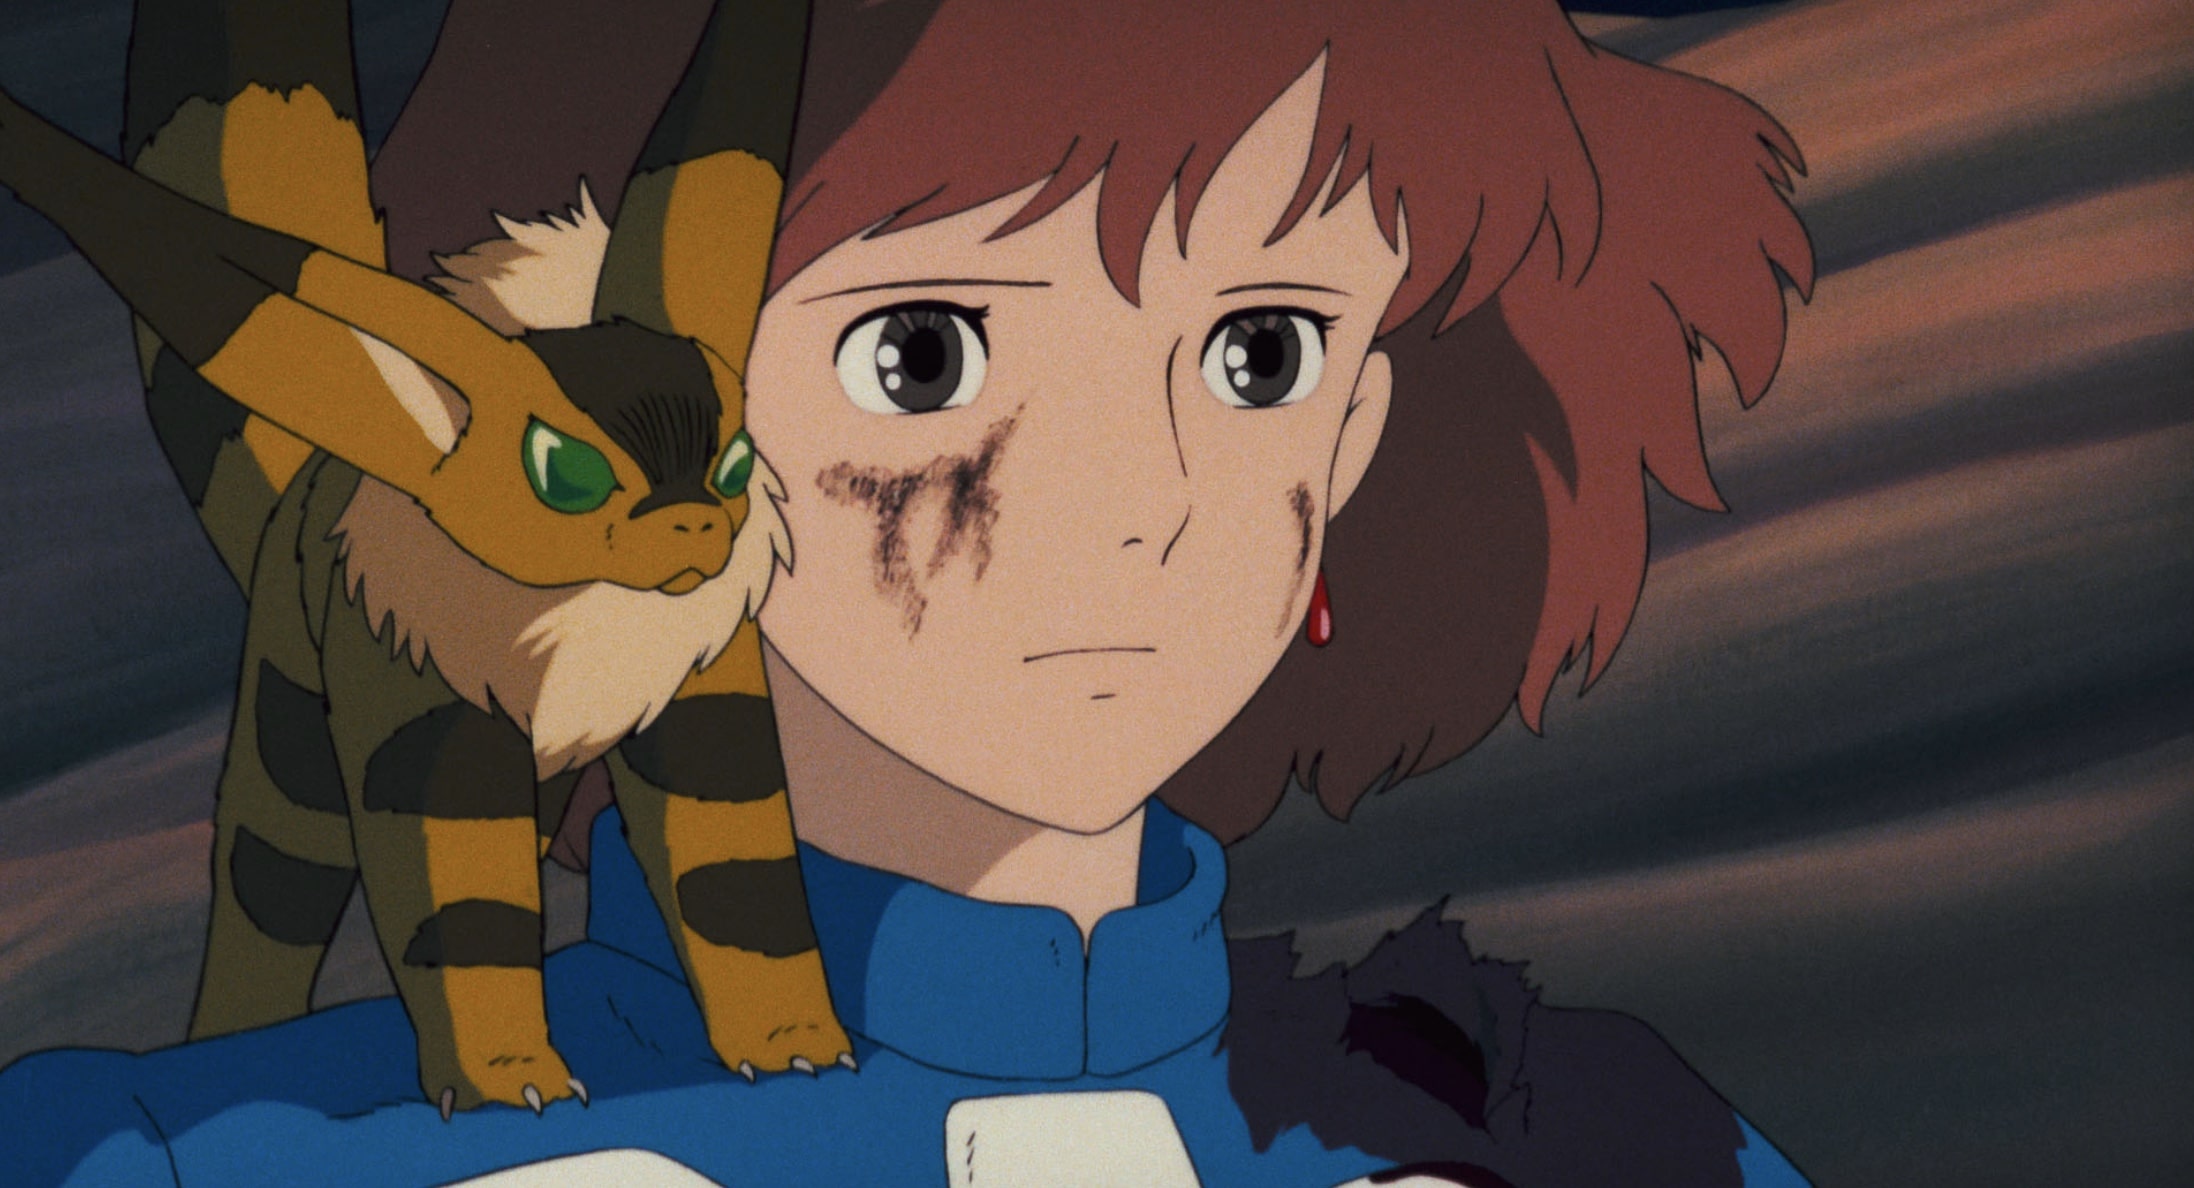 Nausicaä of the Valley of the Wind